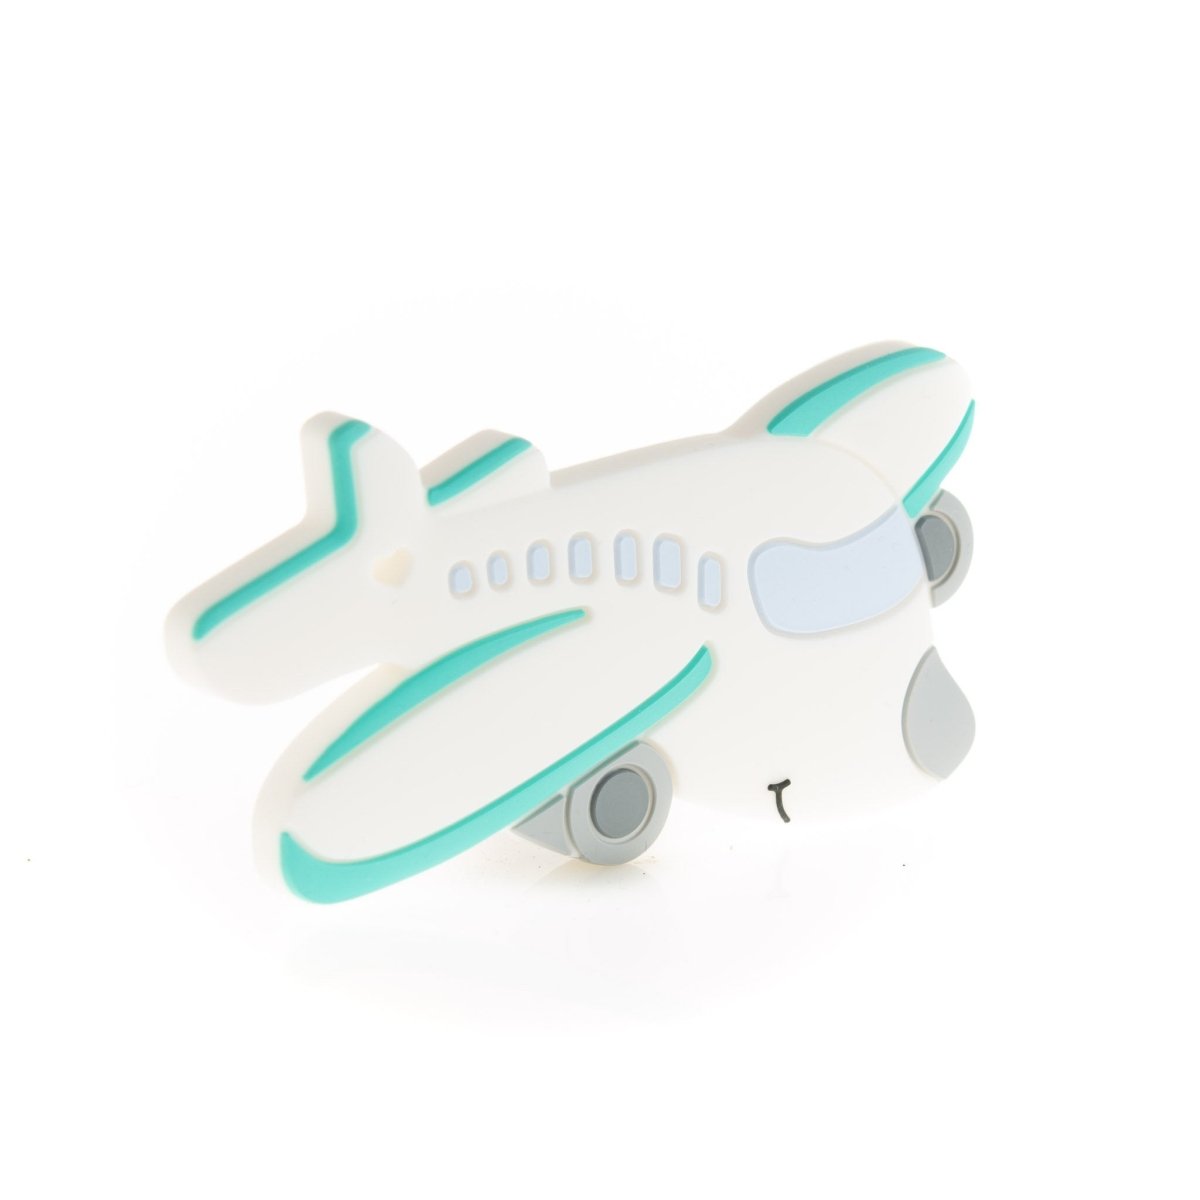 Silicone Teethers and Pendants Airplanes Turquoise from Cara & Co Craft Supply